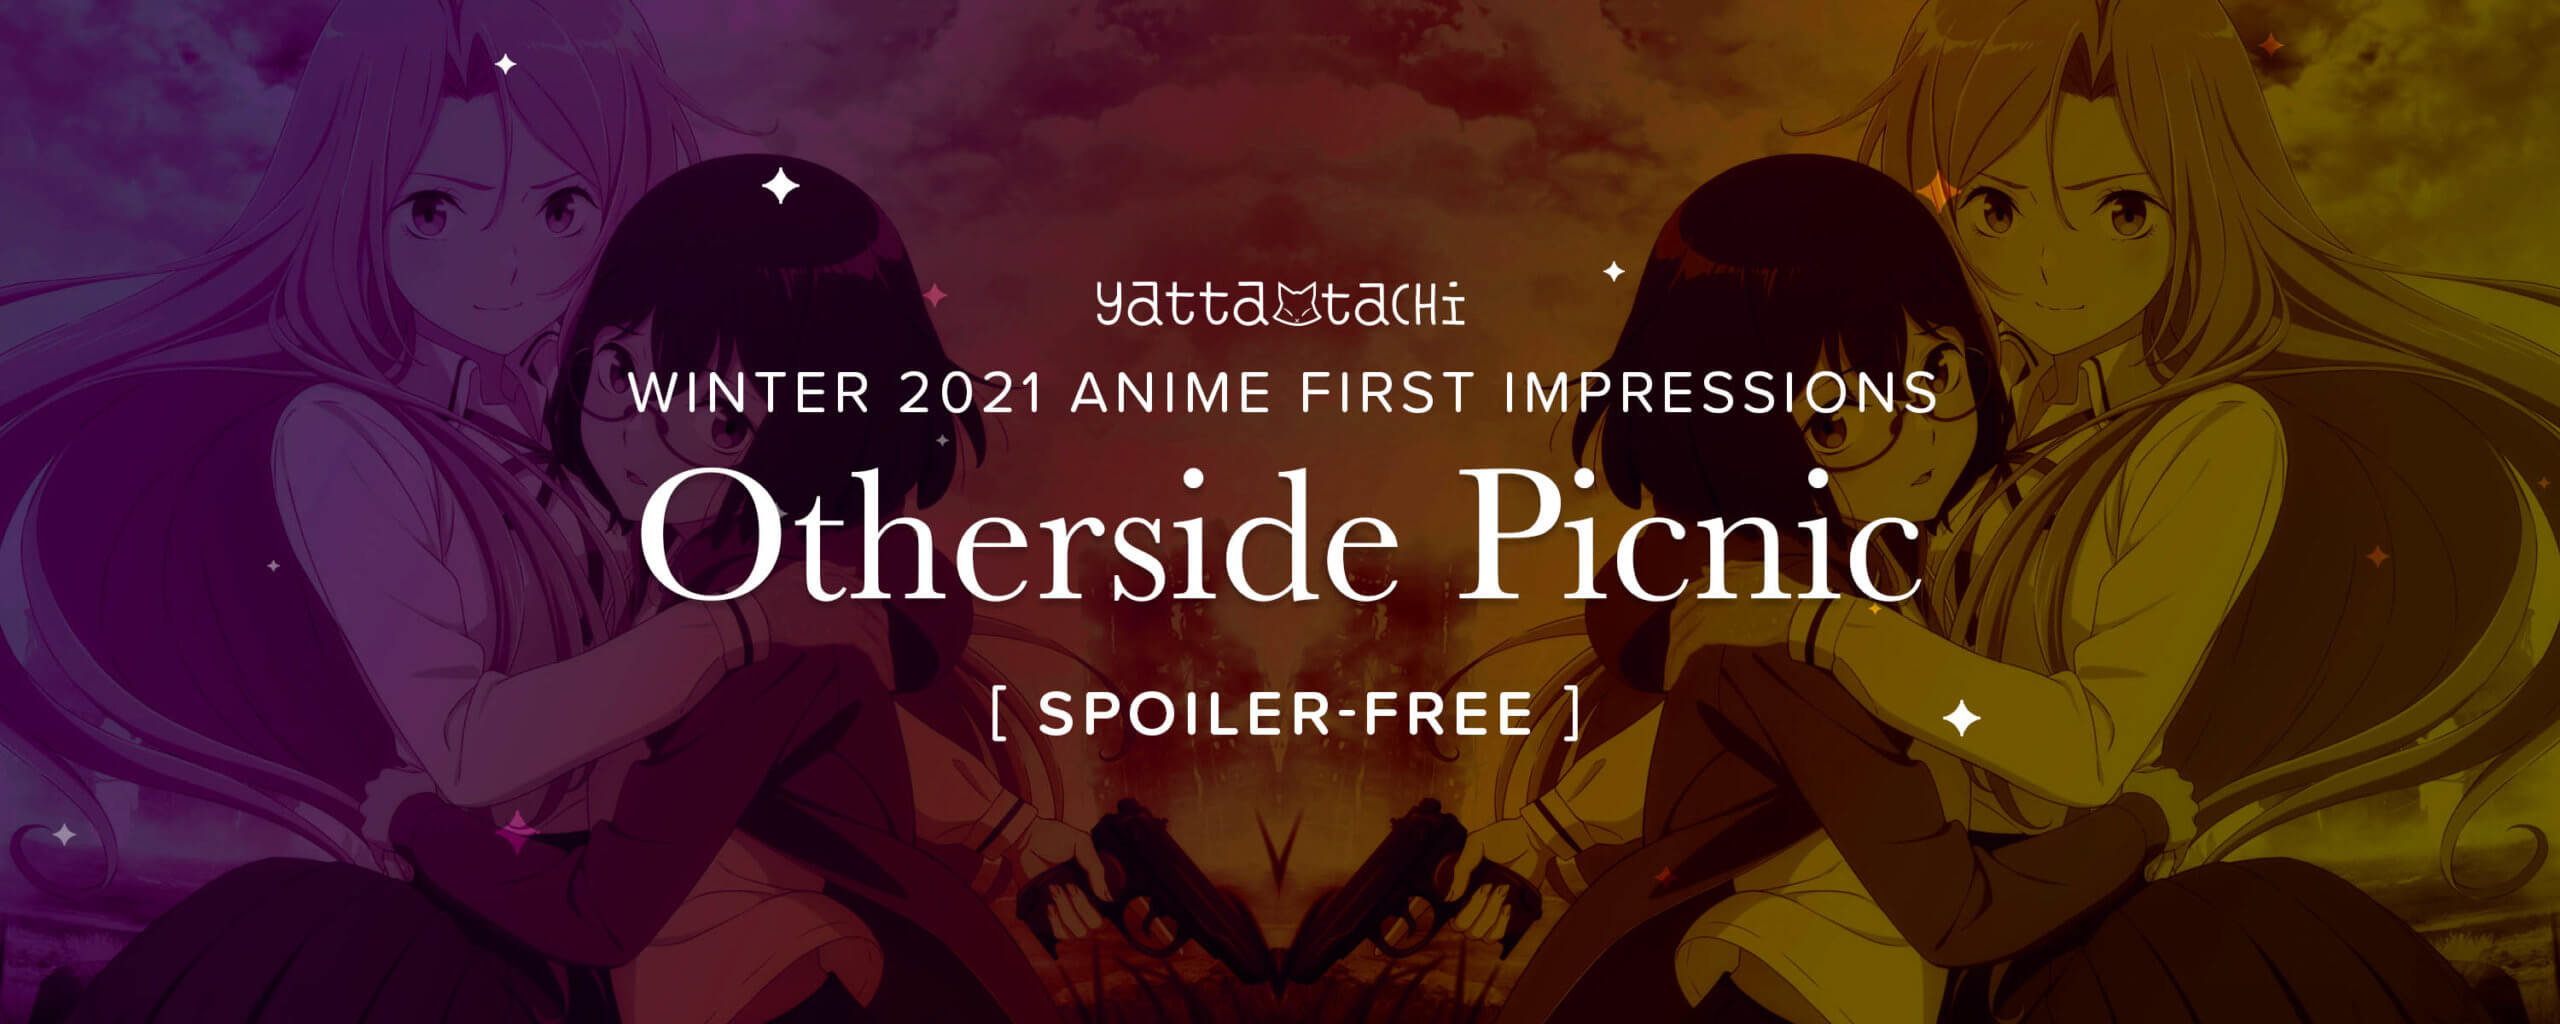 Otherside Picnic Opening Theme Revealed in New Commercial  Anime Corner